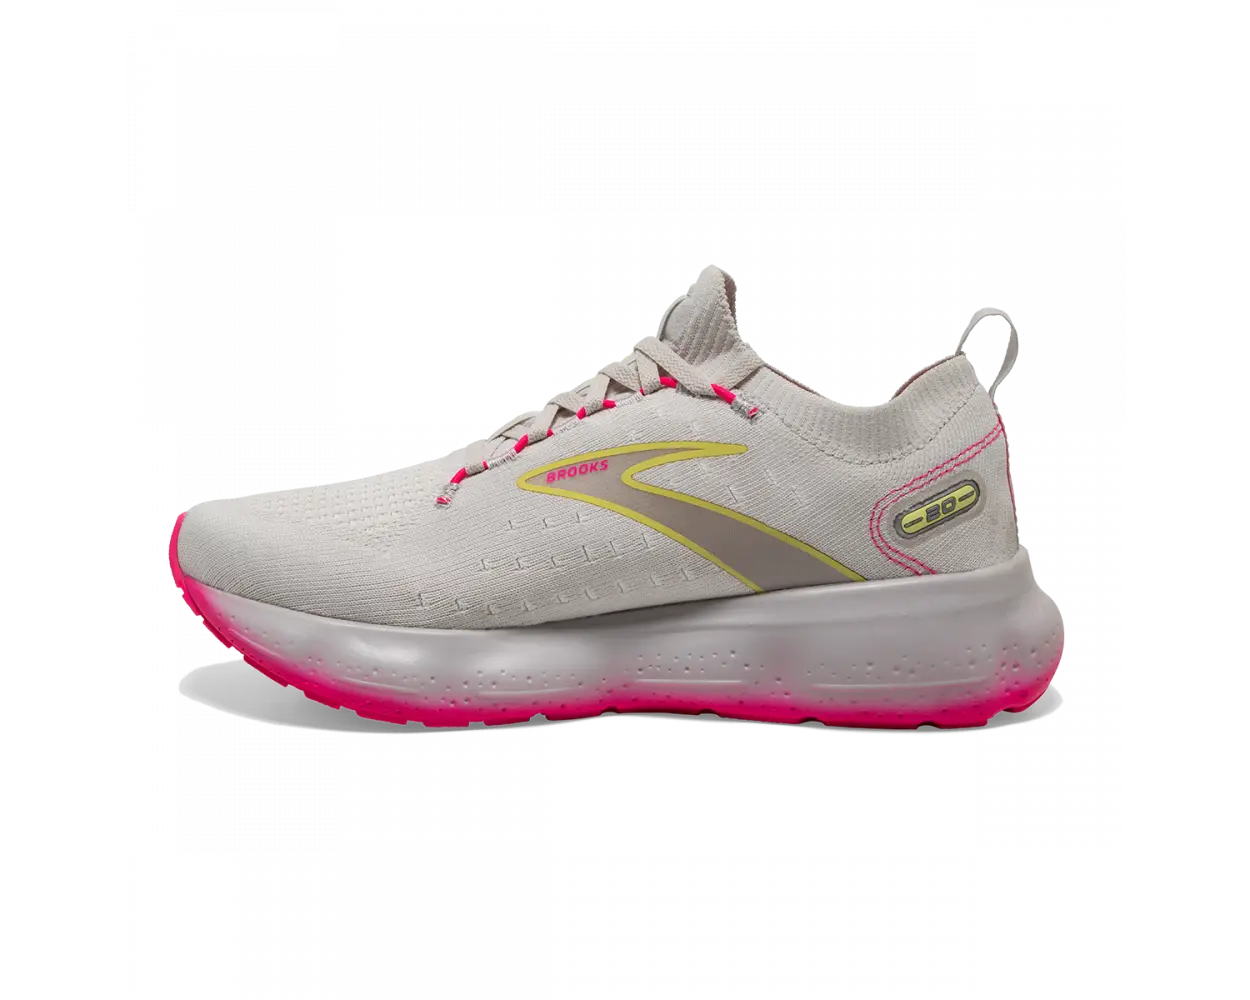 Medial view of the Women's Glycerin Stealthfit 20 in the color Grey/Yellow/Pink